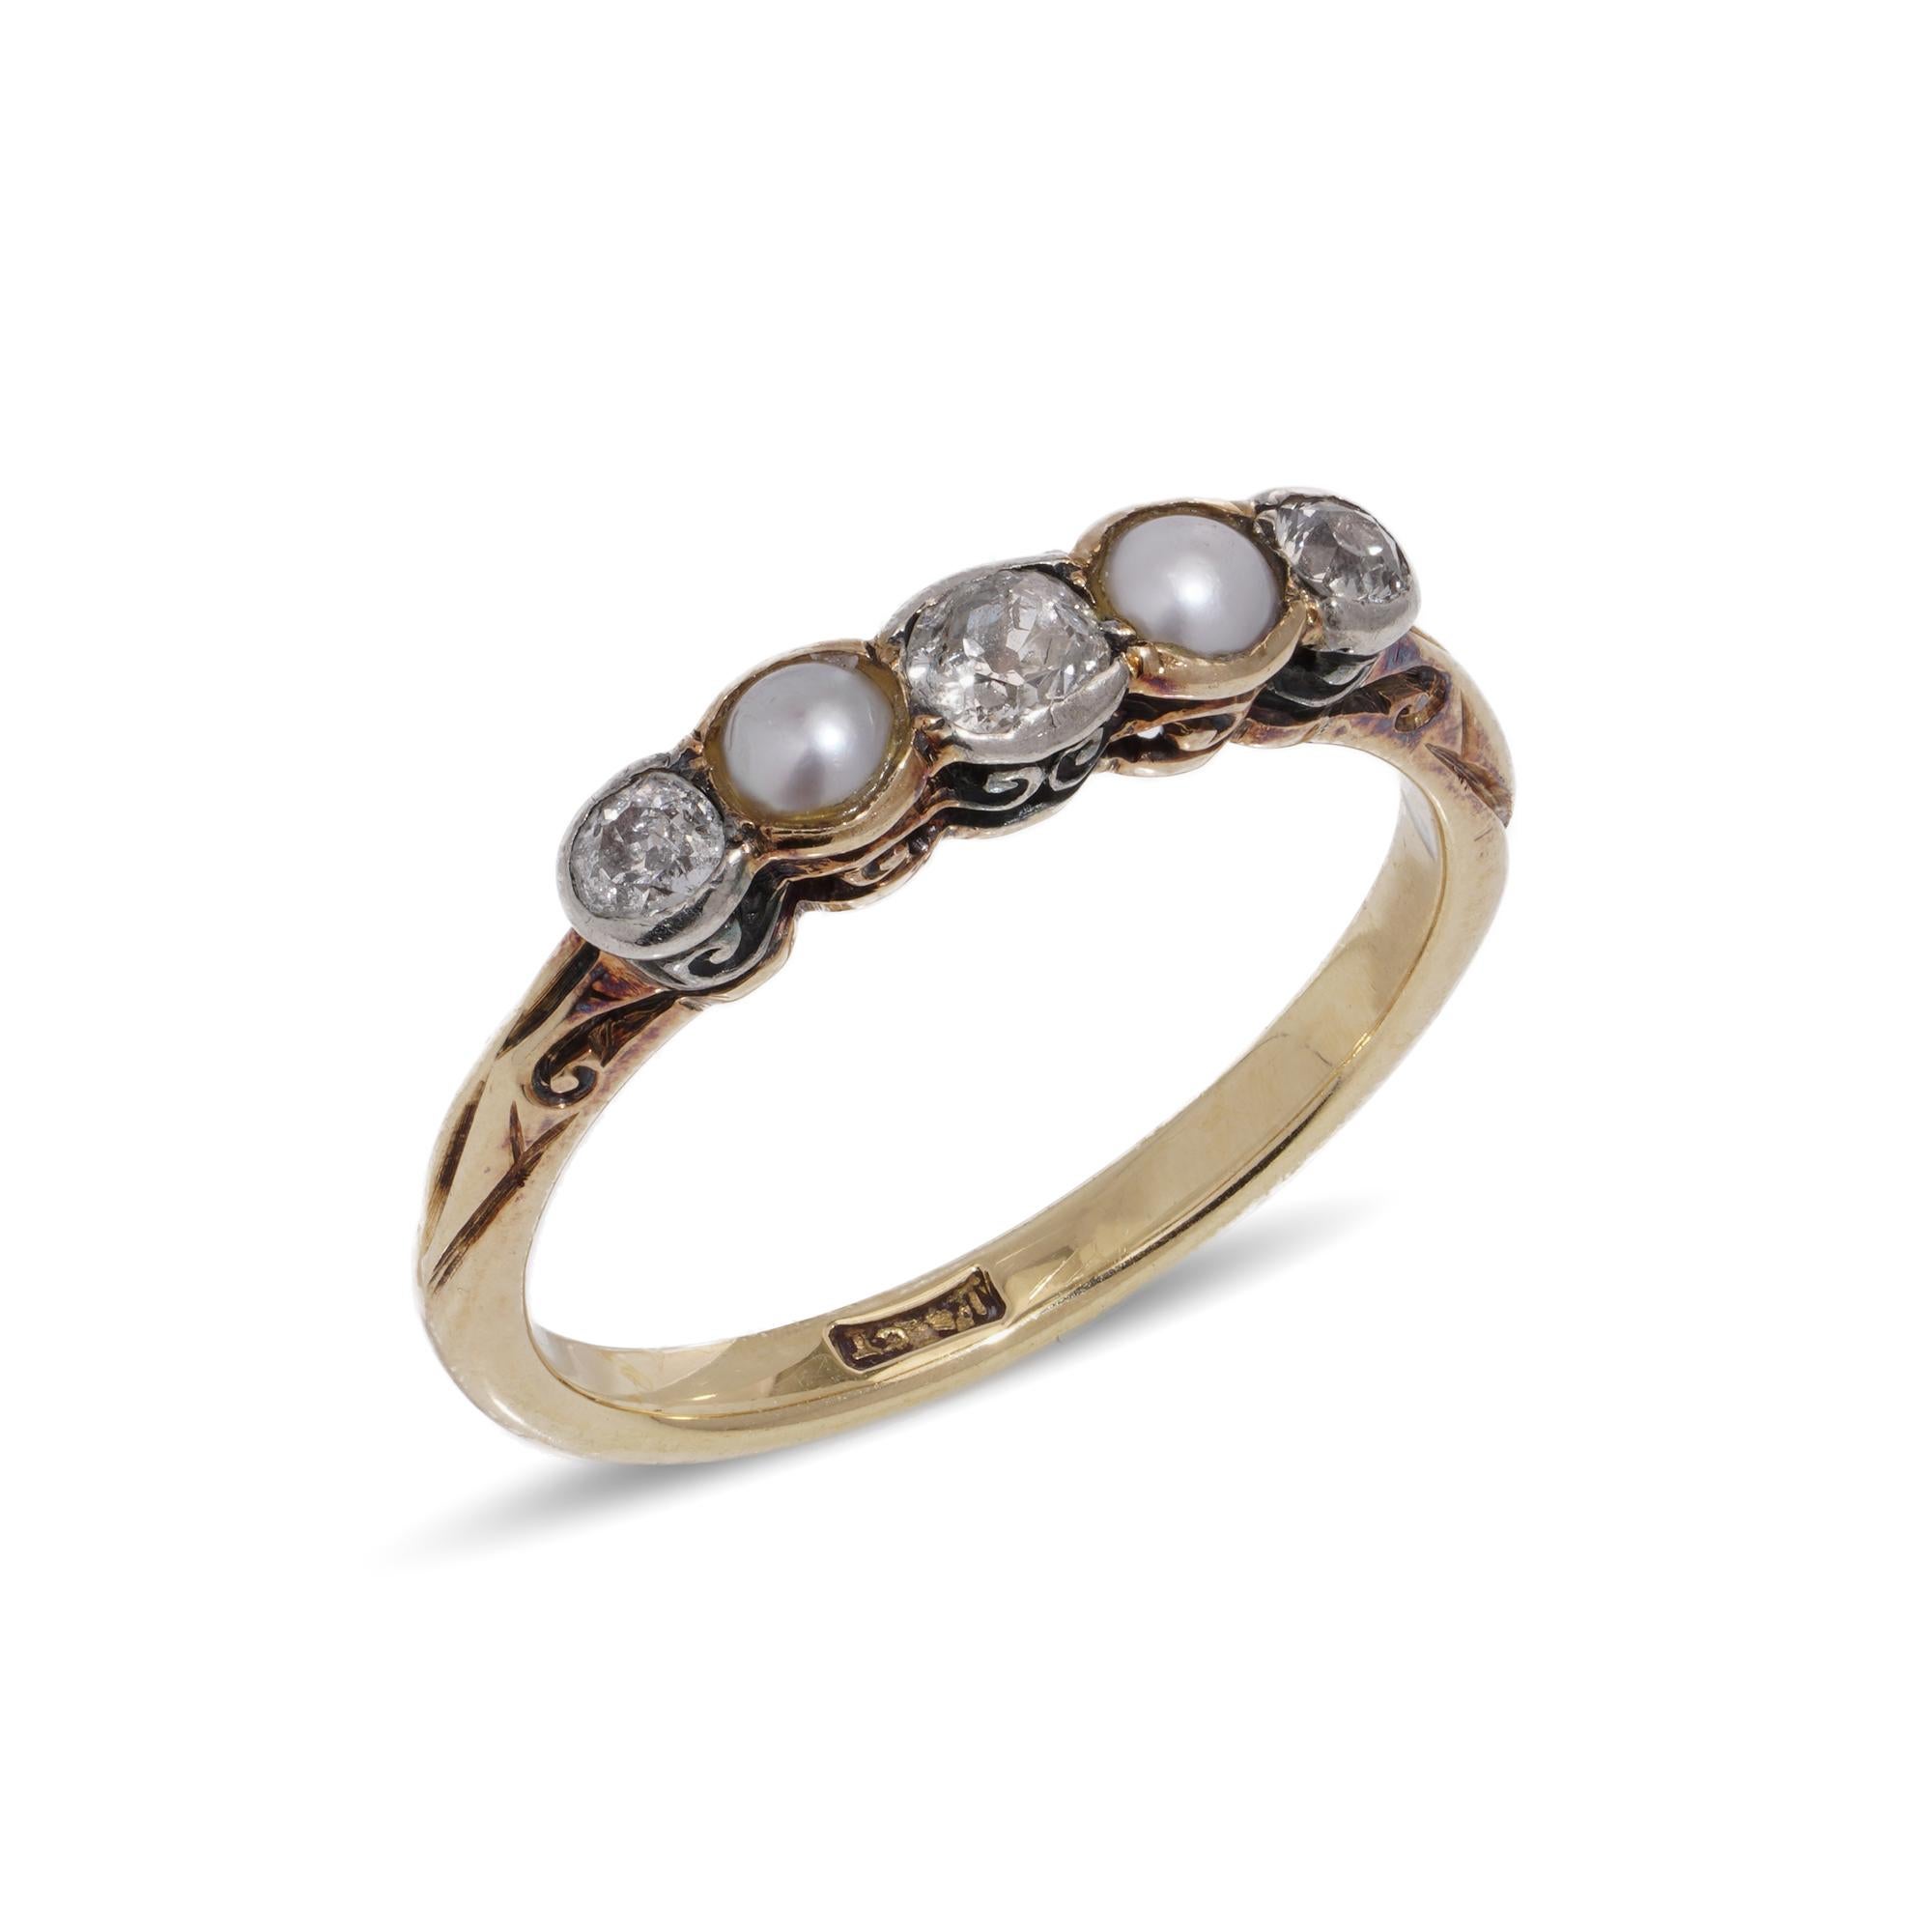 Antique Victorian 18kt. yellow gold and silver ladies five stone ring set with three old European - cut diamonds and natural pearls.
Made in England, circa 1890's
Hallmarked for 18kt gold., tested positive for silver.

Dimensions -
Finger Size (UK)